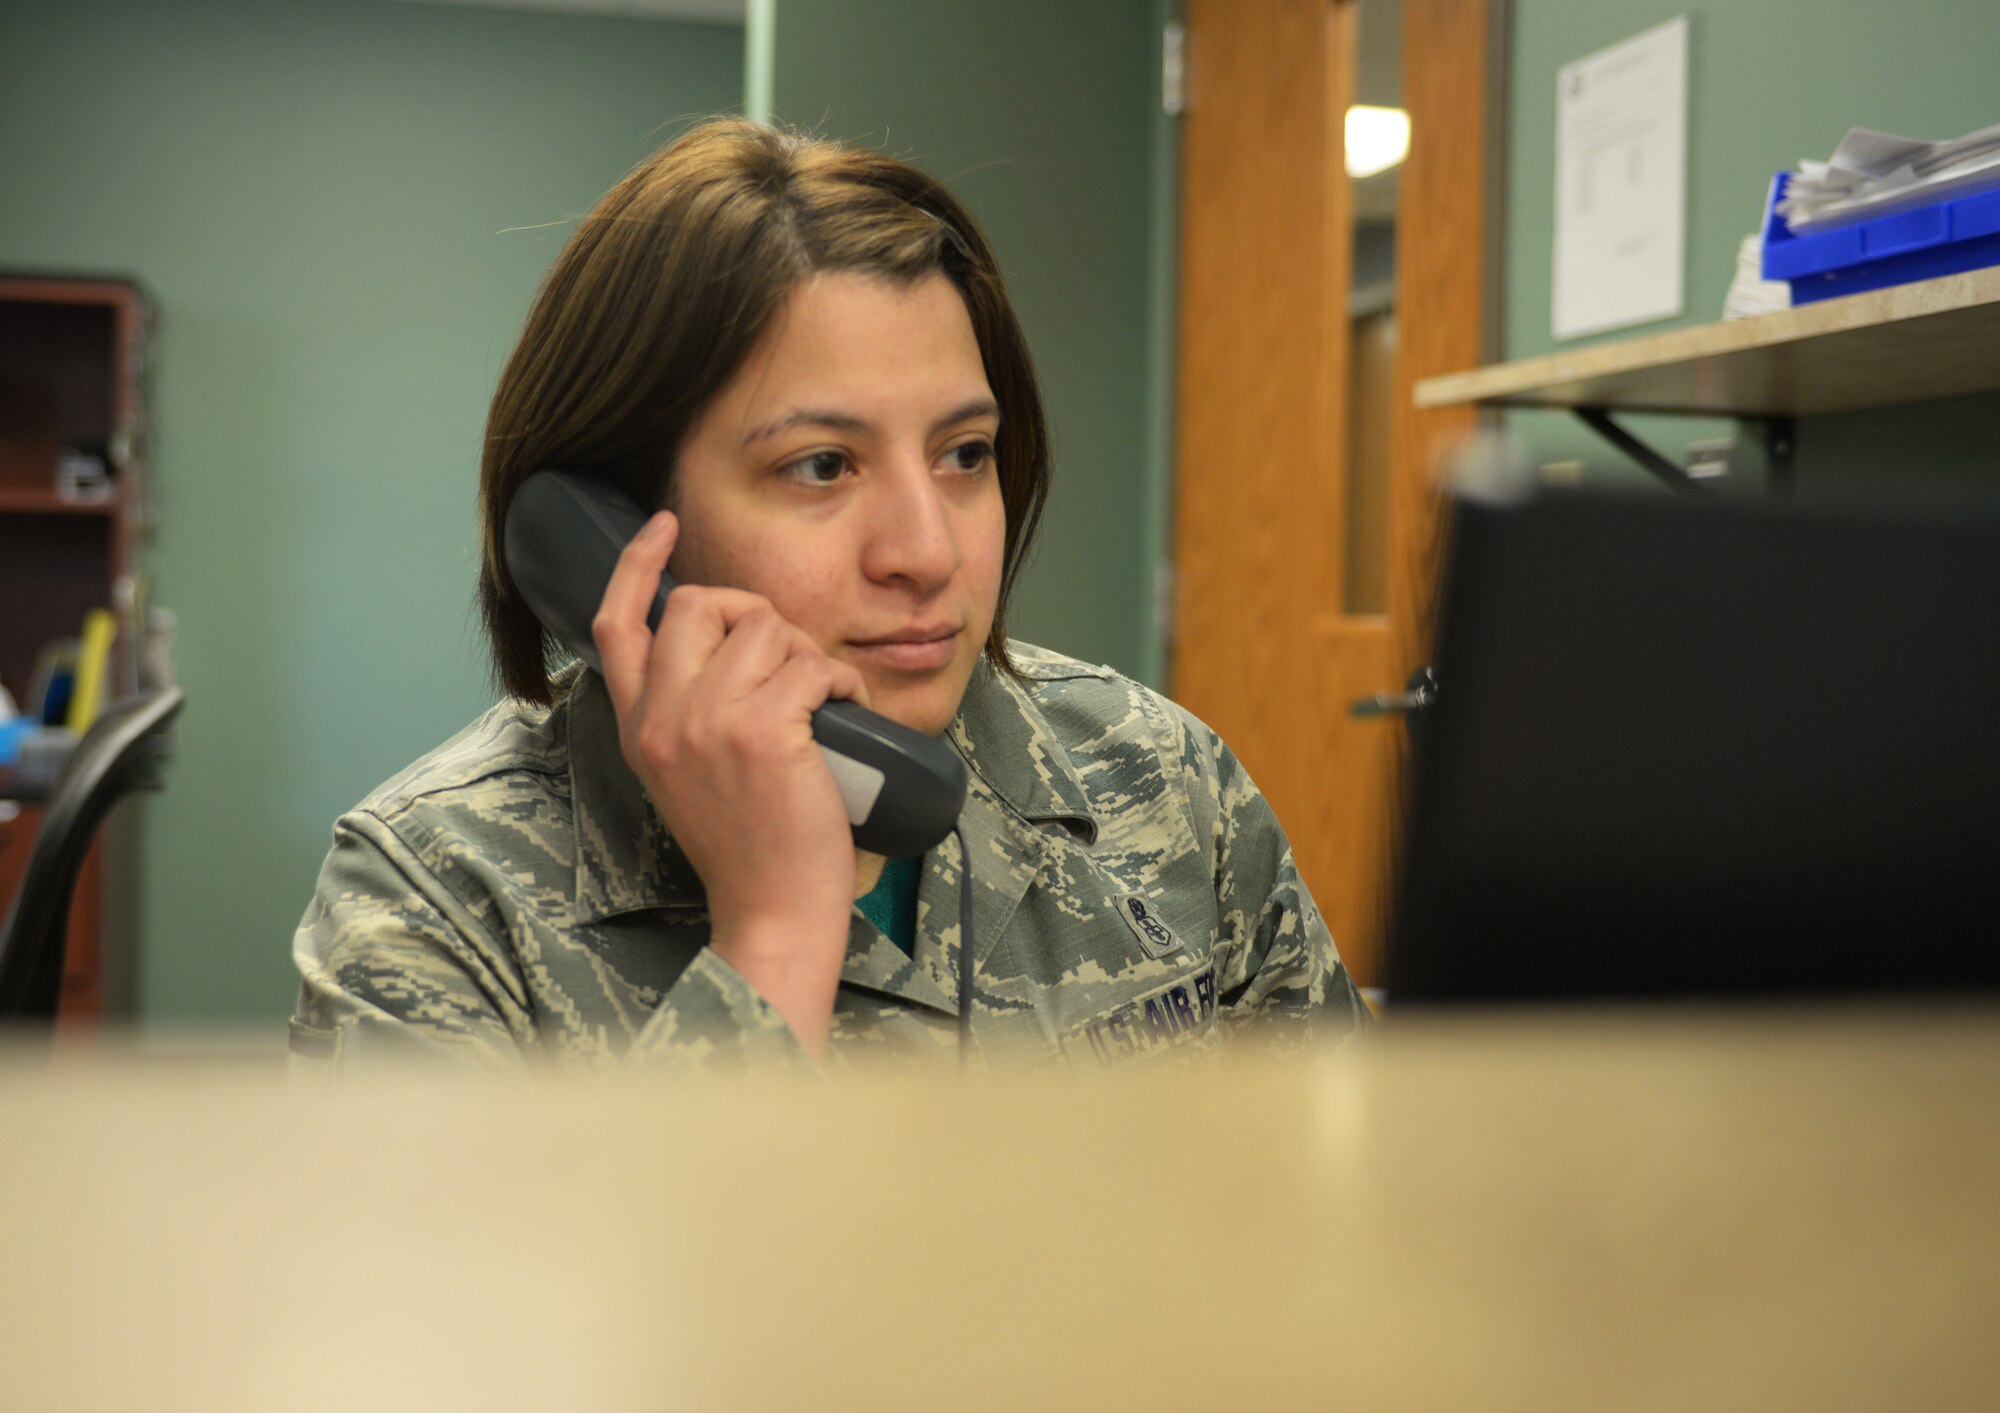 Master Sgt. Lillian Stibor, the 28th Medical Group Dental Clinic superintendent, schedules an appointment for a patient at Ellsworth Air Force Base, S.D., March 9, 2018. The clinic has approximately 20 Airmen who serve as dentists, technicians, and hygienists in the office. (U.S. Air Force photo by Airman 1st Class Thomas Karol)